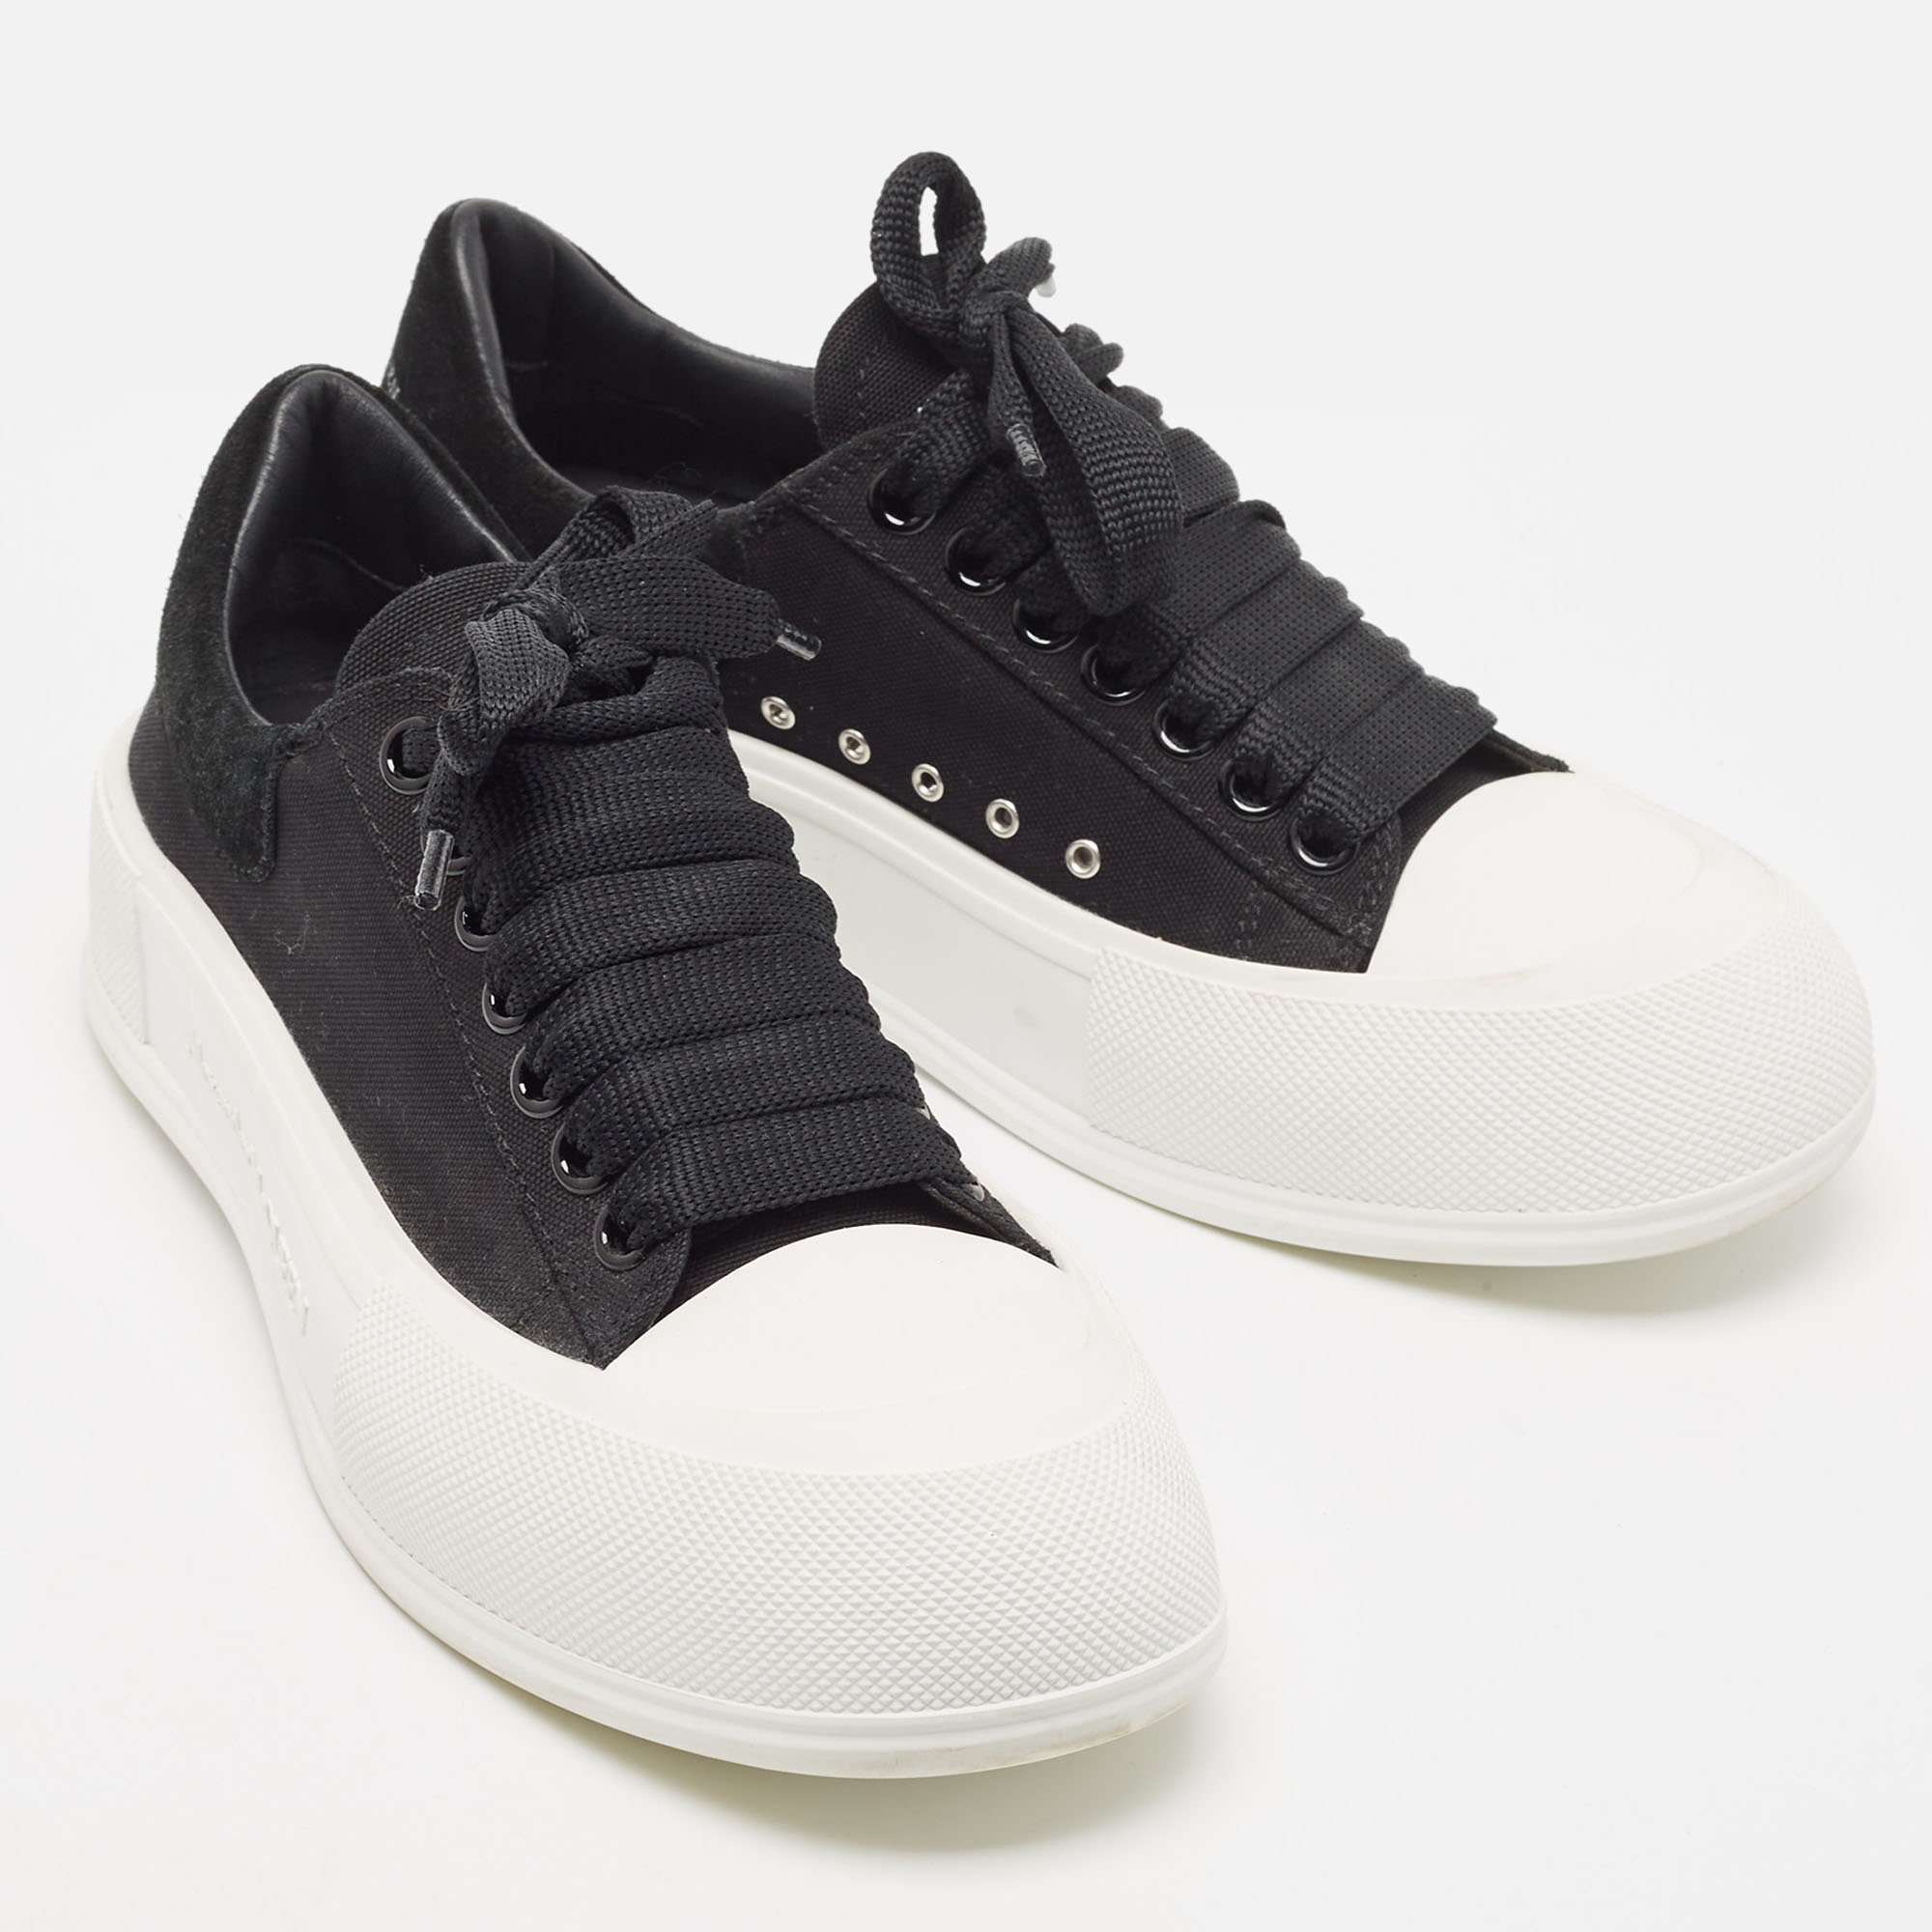 Alexander McQueen Black/White Canvas Deck Lace Up Plimsoll Sneakers Size 39